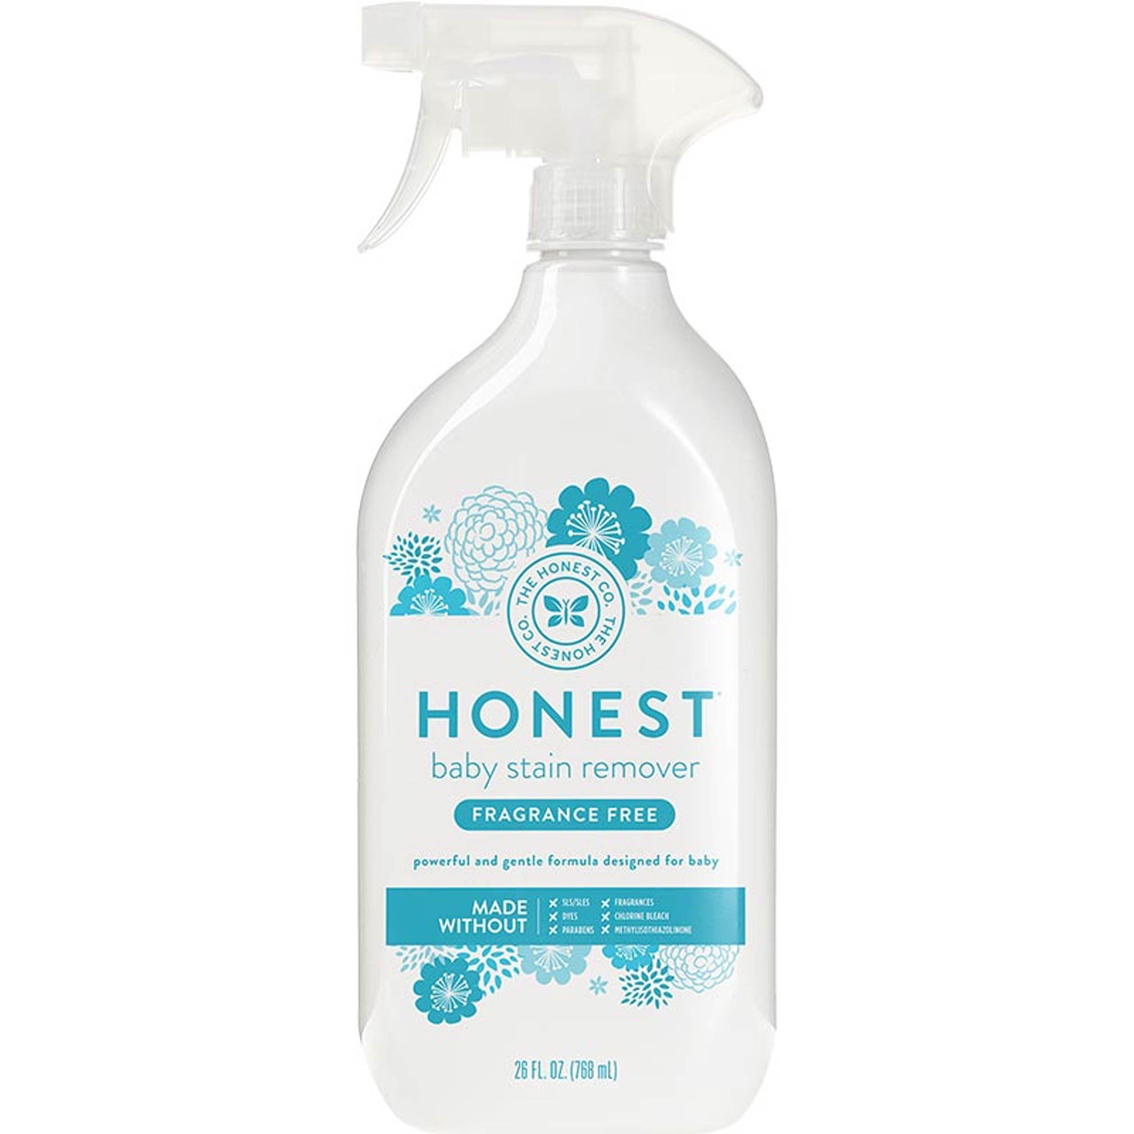 The Honest Company Honest Baby Stain Remover 26 Oz., Stain Removers, Household